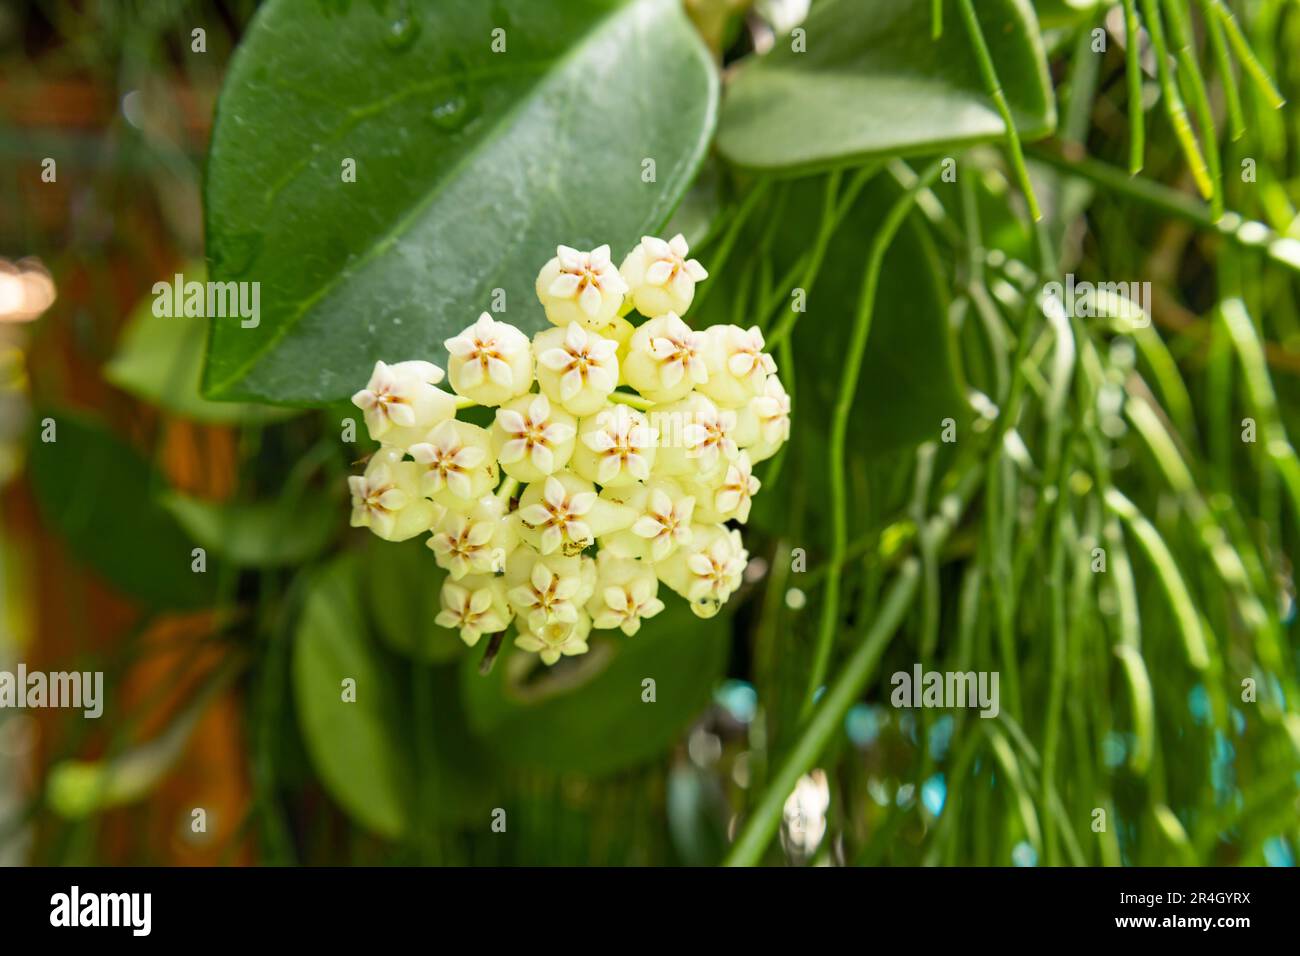 Hoya carnosa white yellow flowers. Porcelain flower or wax plant, blooming flowers ball Stock Photo